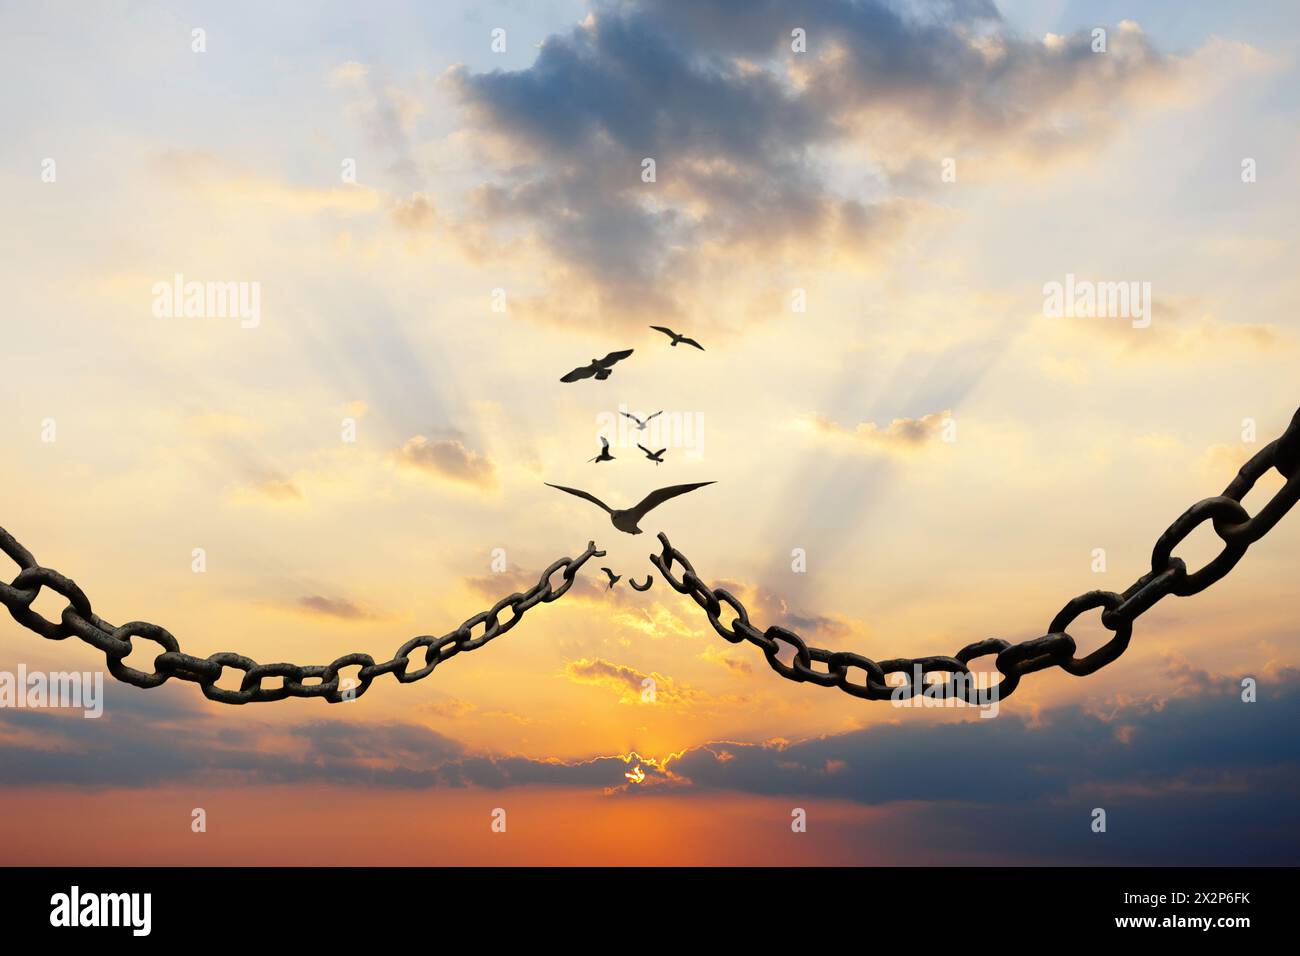 Metal Chains Break And Birds Fly At Sunset In The Sky, Concept. Freedom And Change, Creative Idea. Freedom Of Choice. Democracy Motivation And Hope Stock Photo